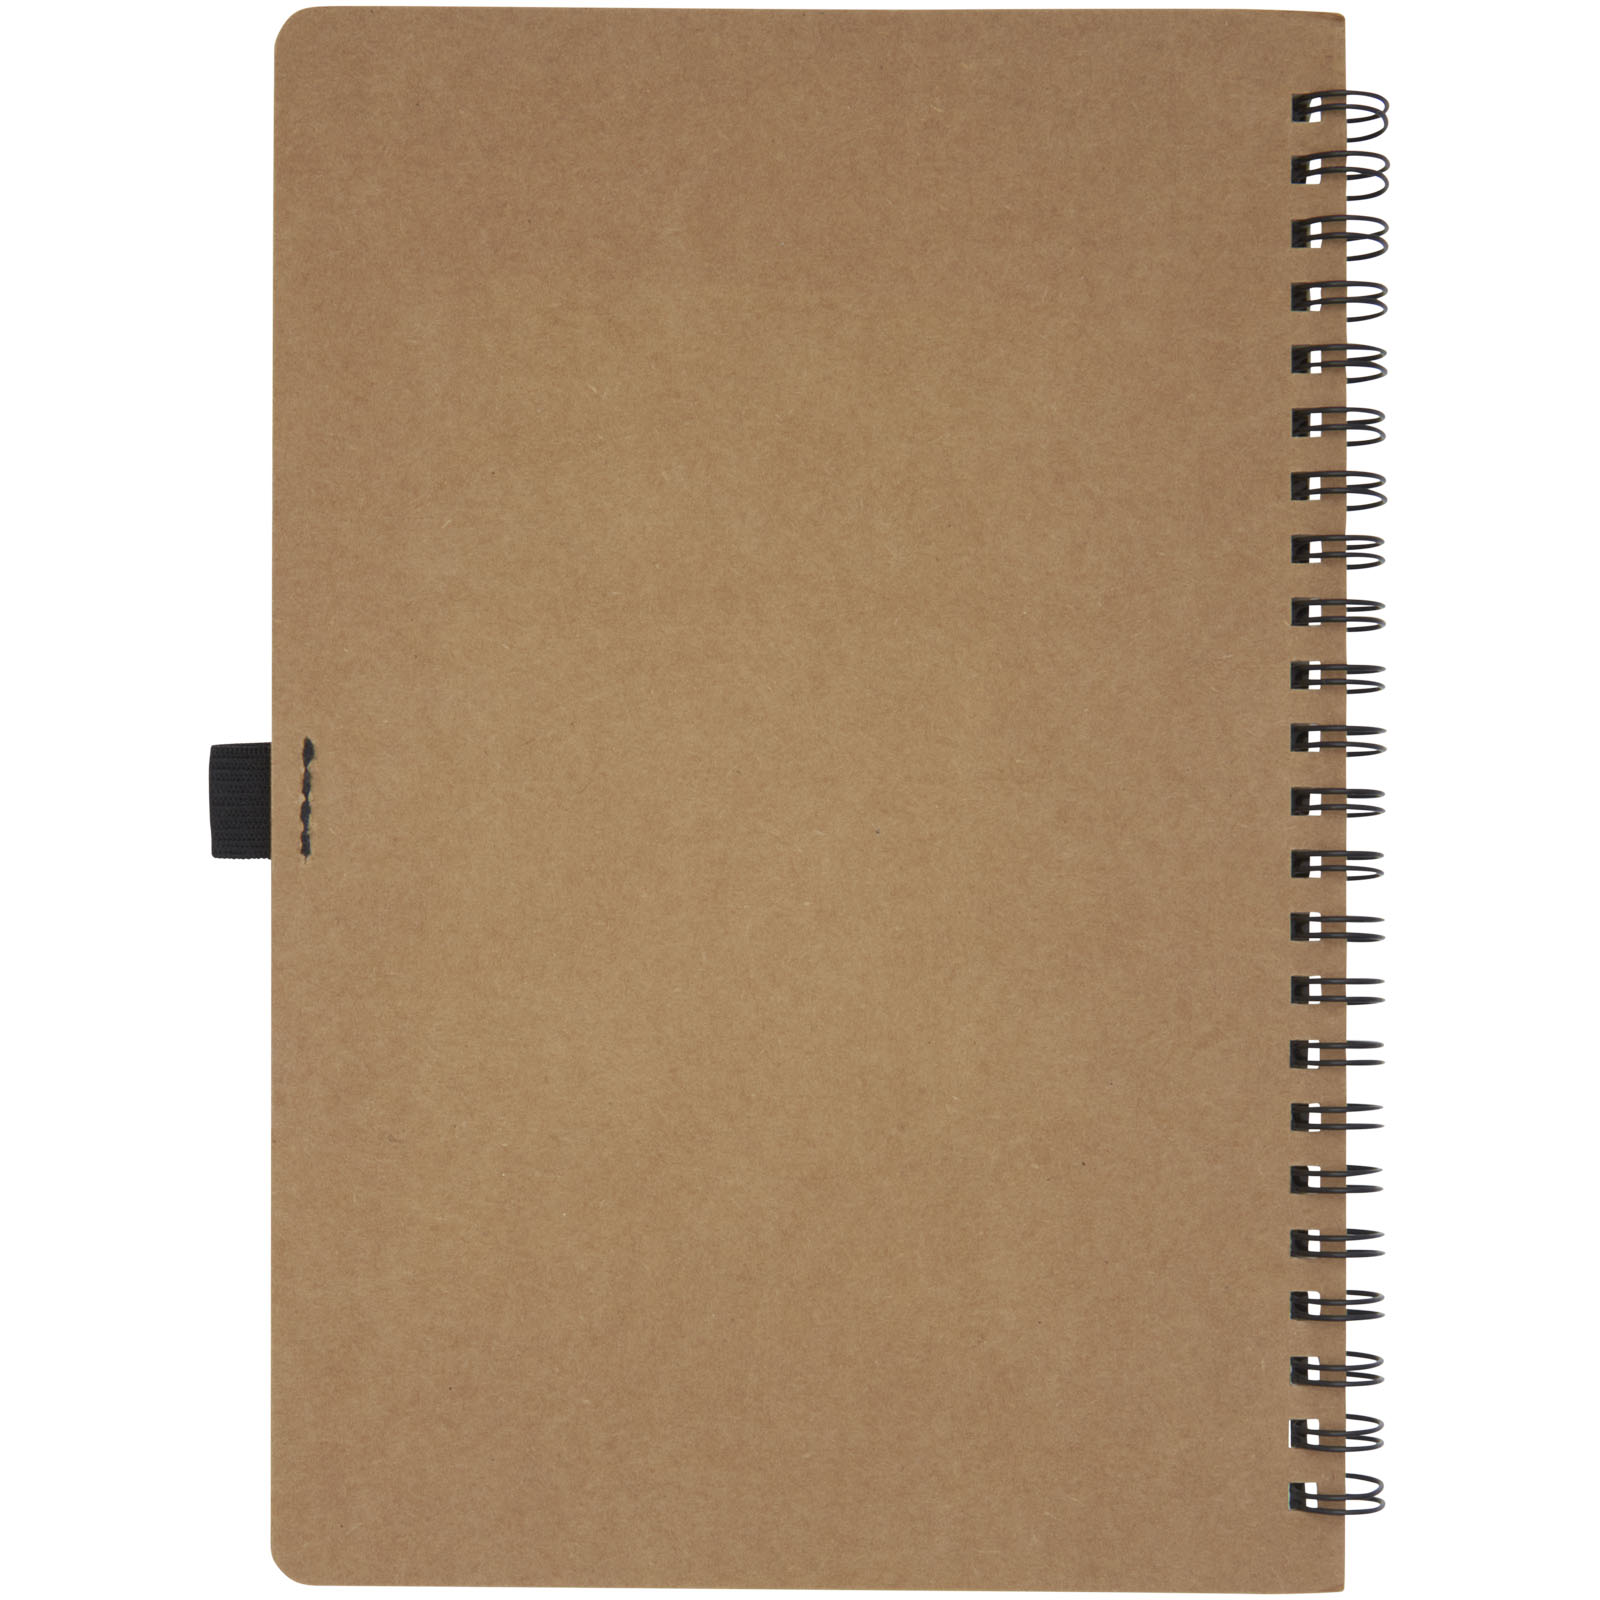 Advertising Notebooks - Cobble A5 wire-o recycled cardboard notebook with stone paper - 2